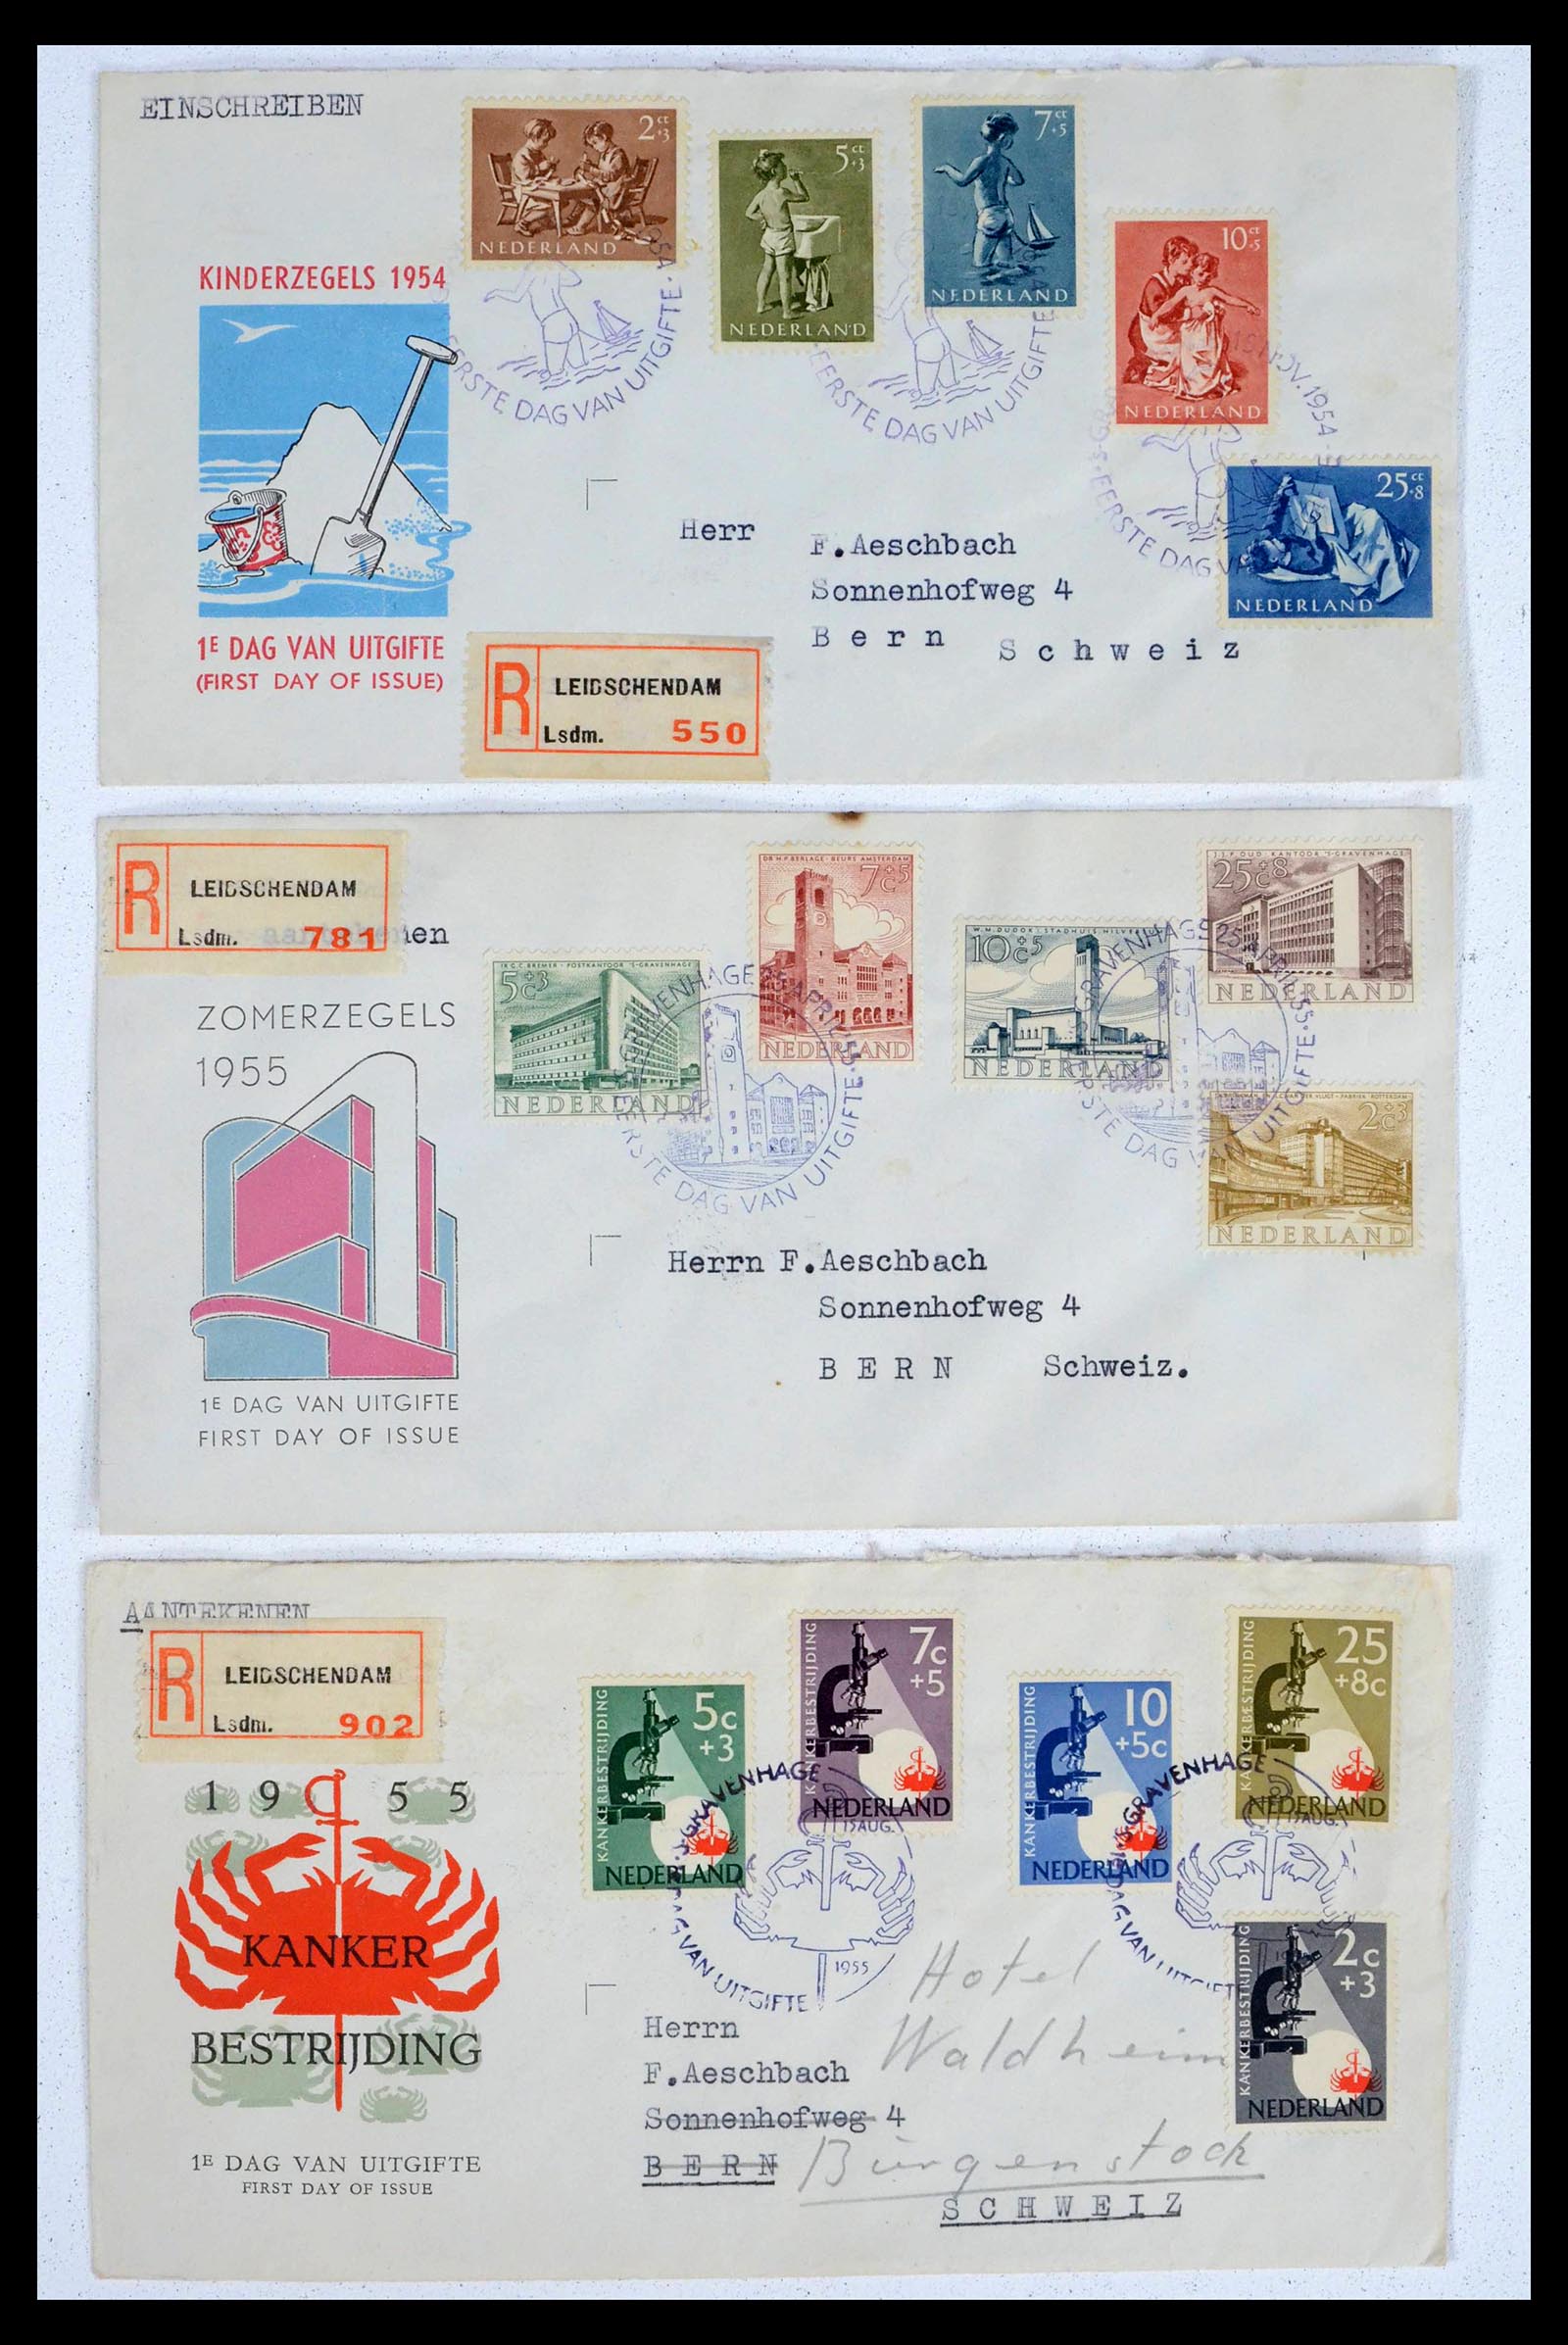 39474 0010 - Stamp collection 39474 Netherlands FDC's 1950-1960.